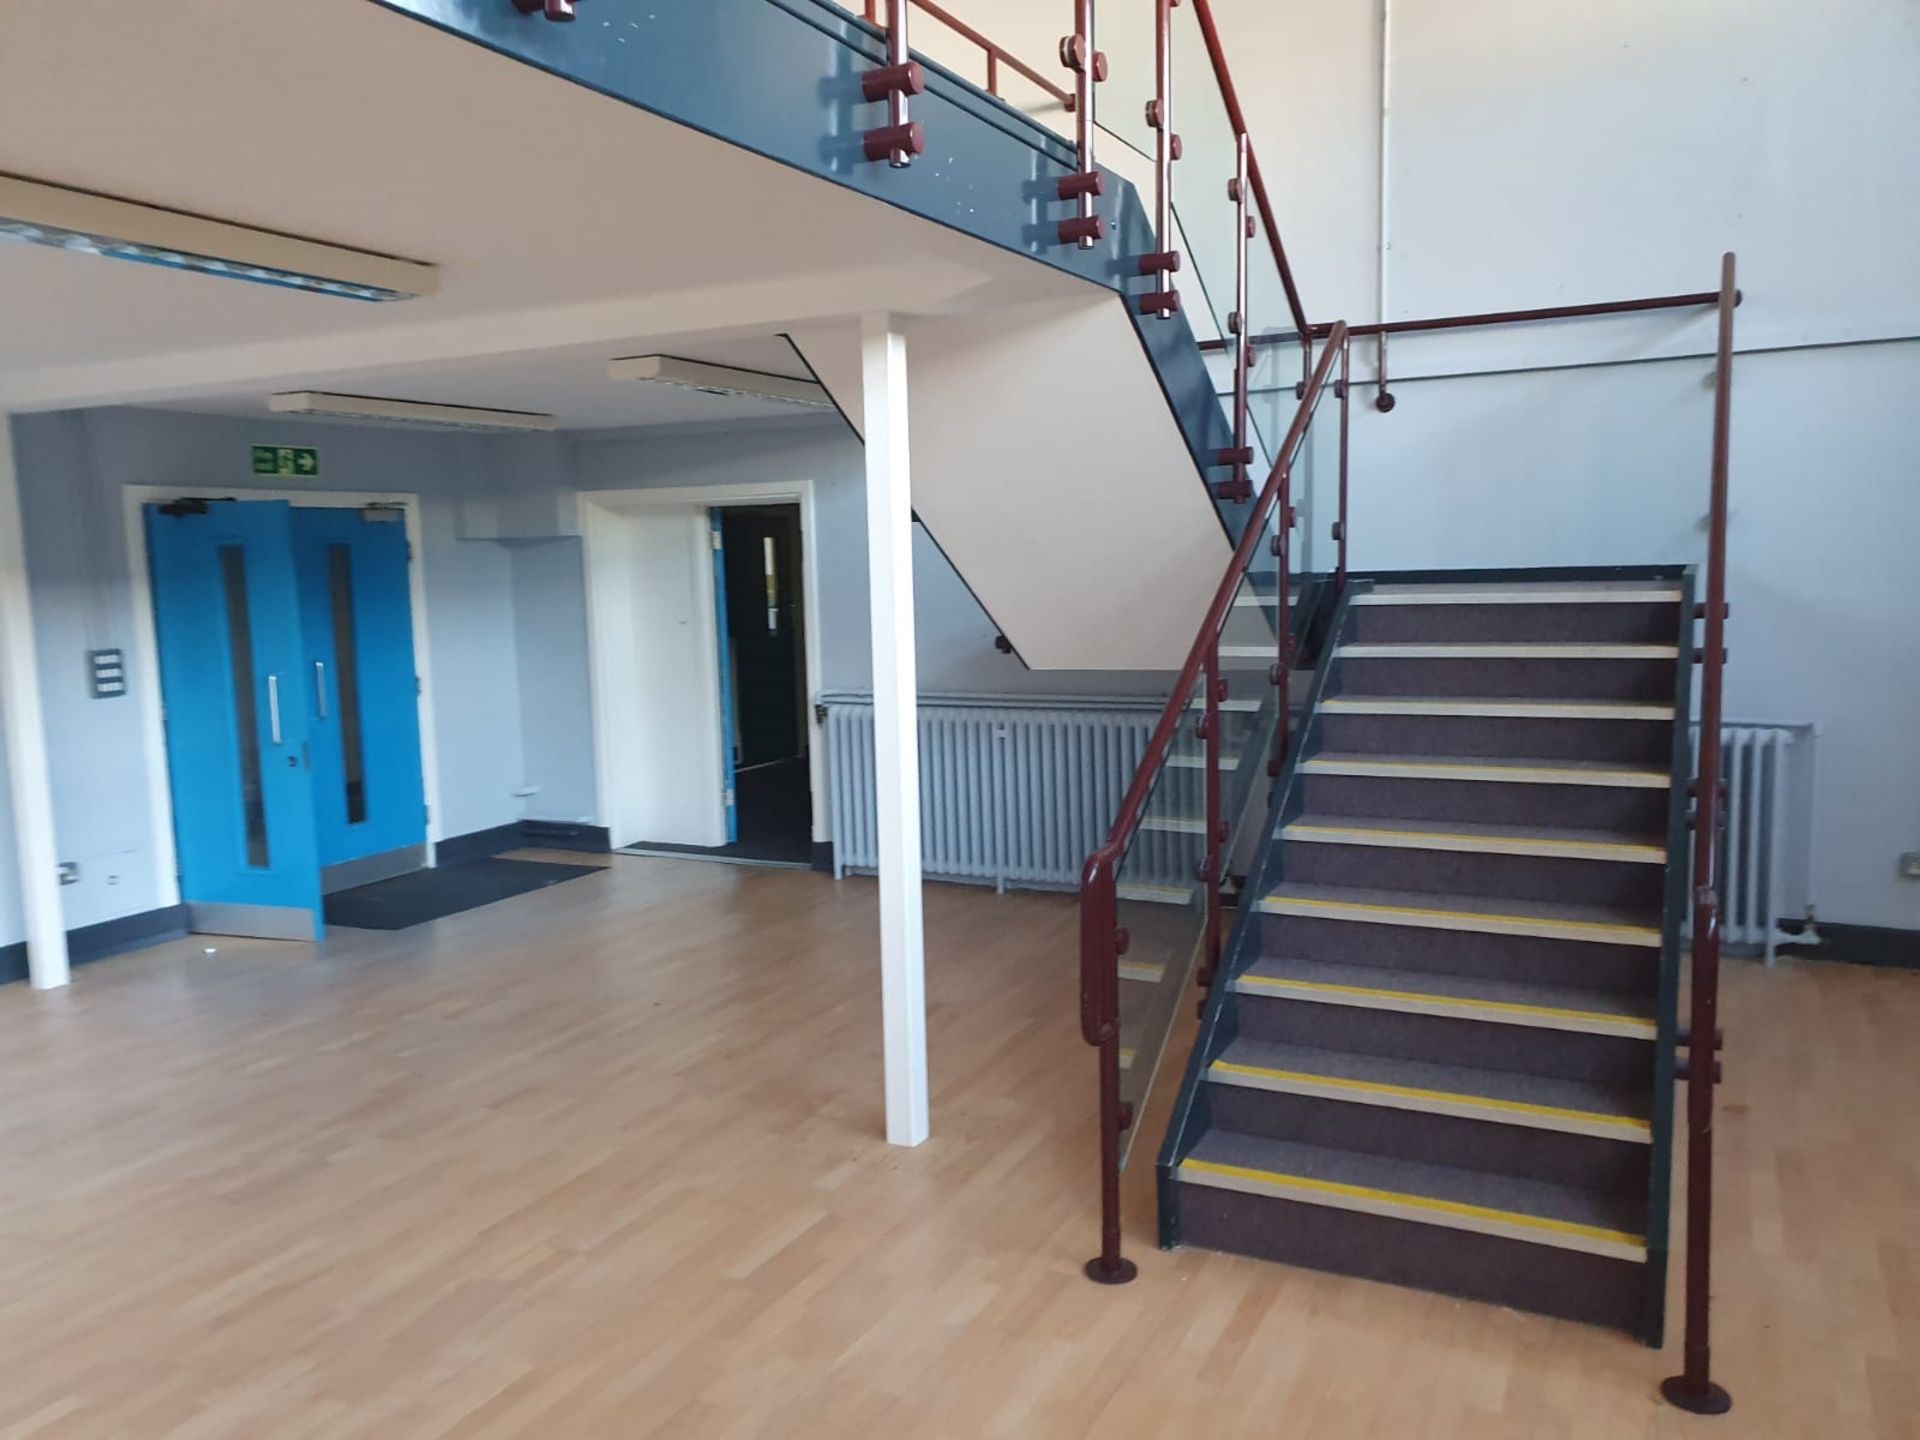 1 x Mezzanine Floor With Two Sets of Floating Stairs and Glazed Safety Panels With Hand Rails - From - Image 9 of 18